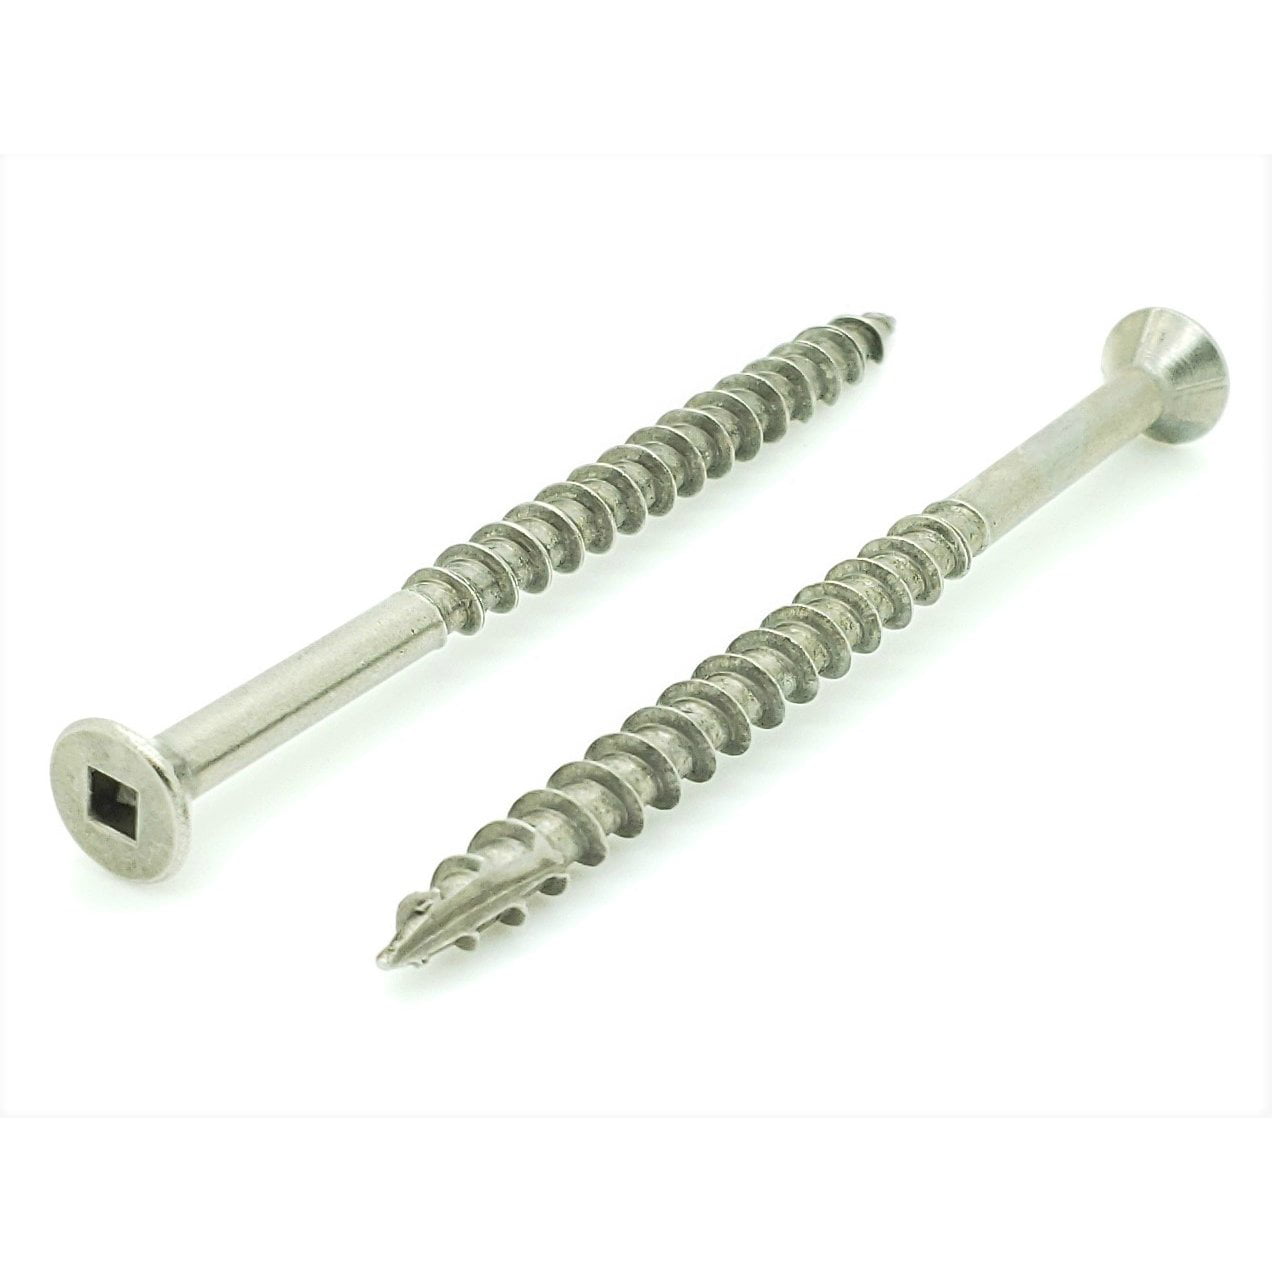 100 Qty 10 X 3 Stainless Steel Fence And Deck Screws Square Drive